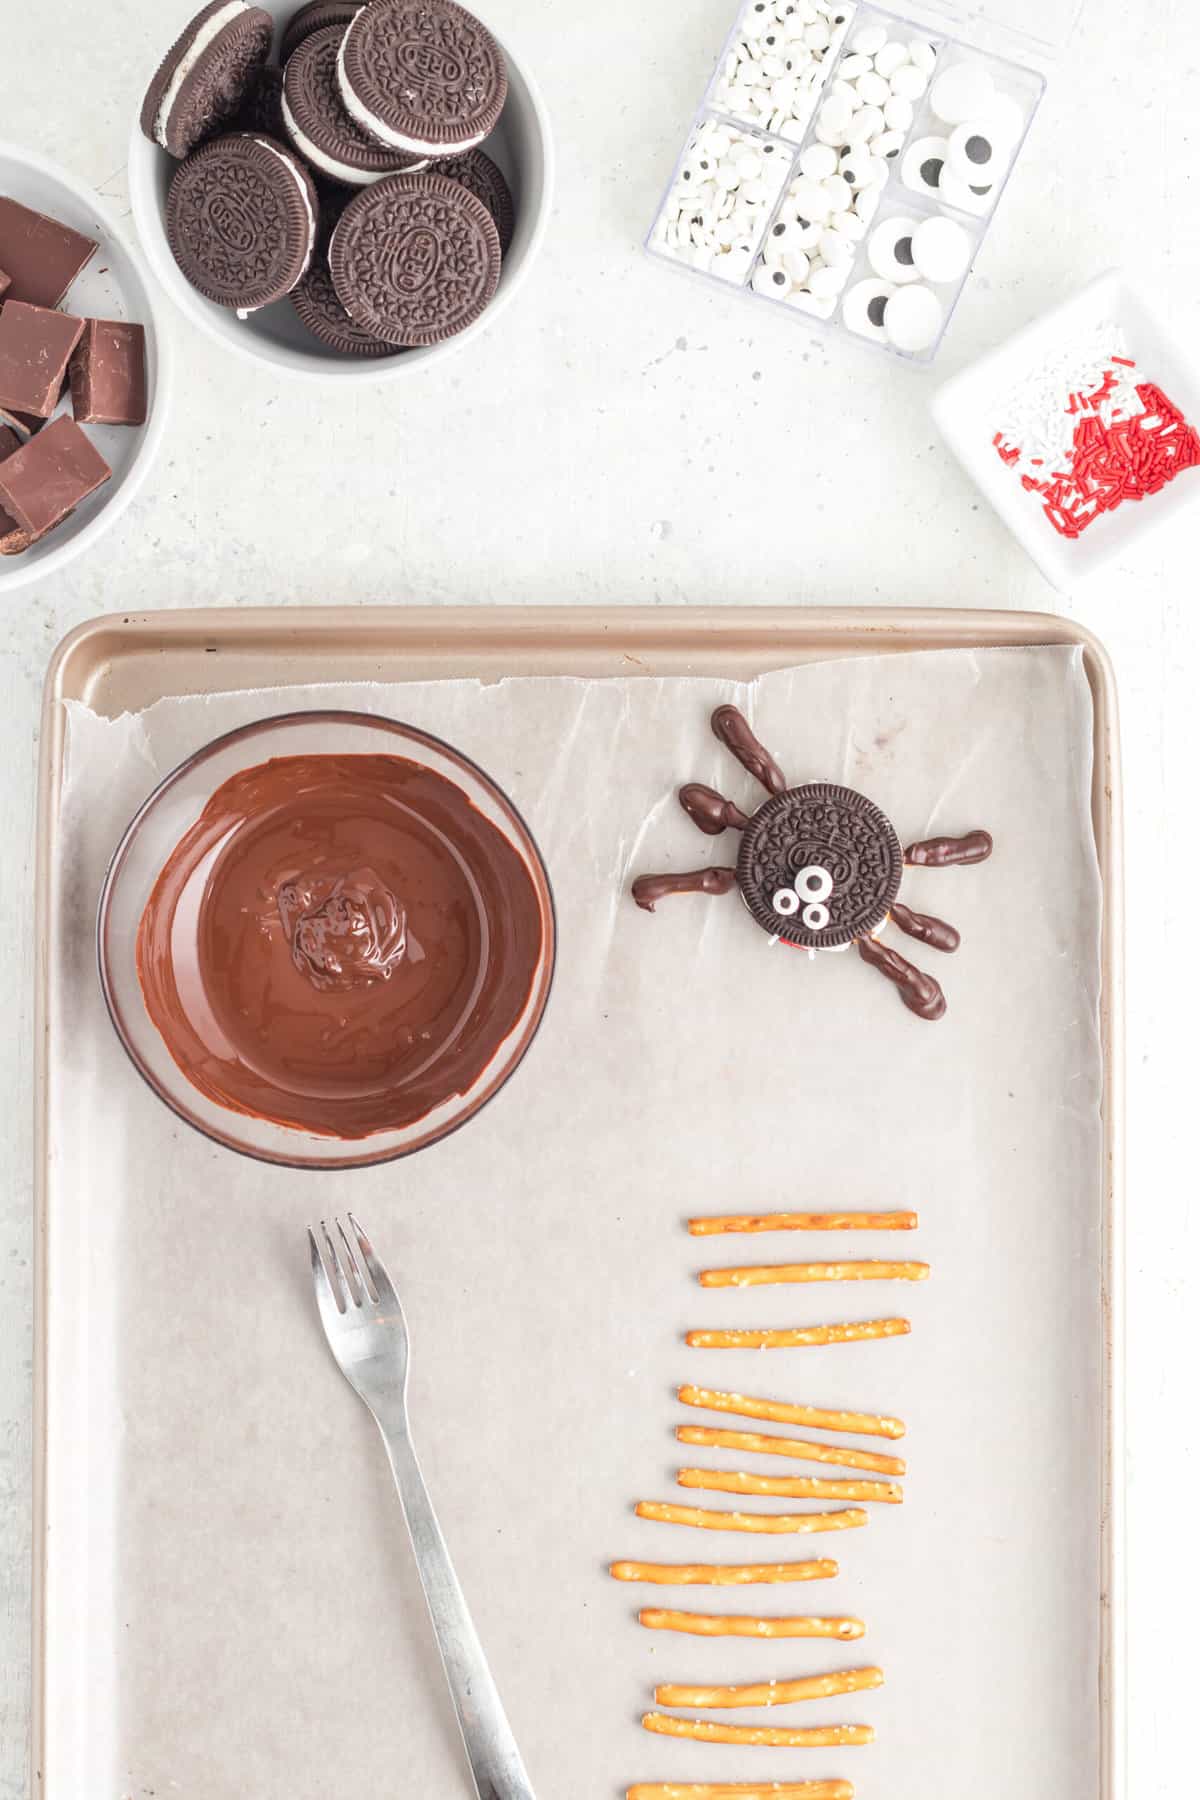 Line a Baking Sheet with Wax Paper. In a Medium Microwave safe bowl melt the chocolate.